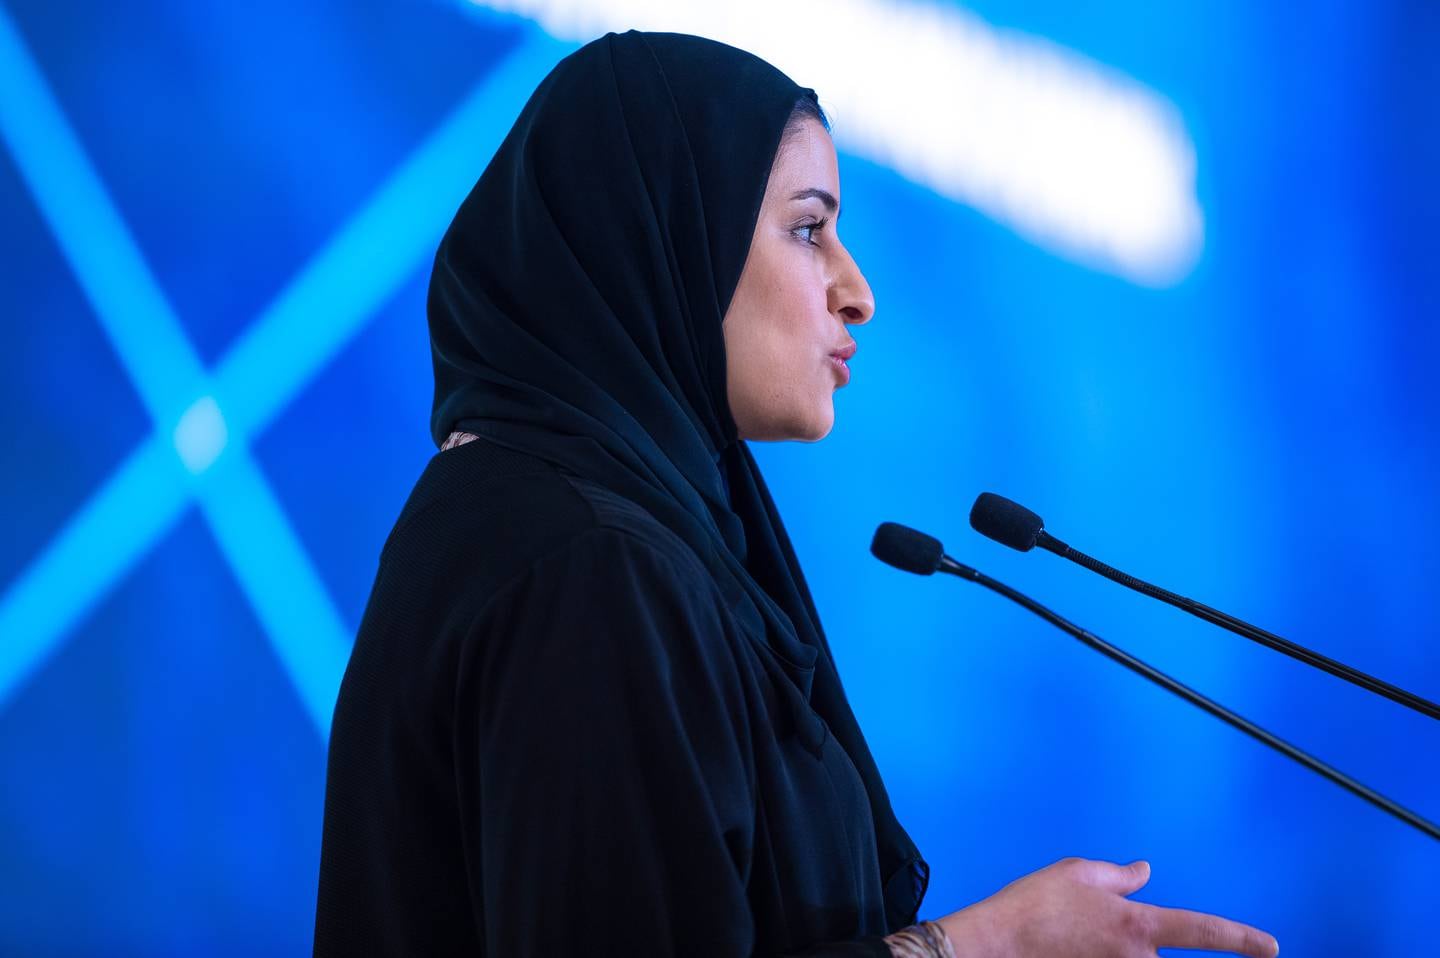 Her Excellency Sarah Al Amiri,  Minister of State for Advanced Technology during the UAE Industry 4.0 Program at the ADNOC Business Center, Abu Dhabi. Victor Besa/The National.